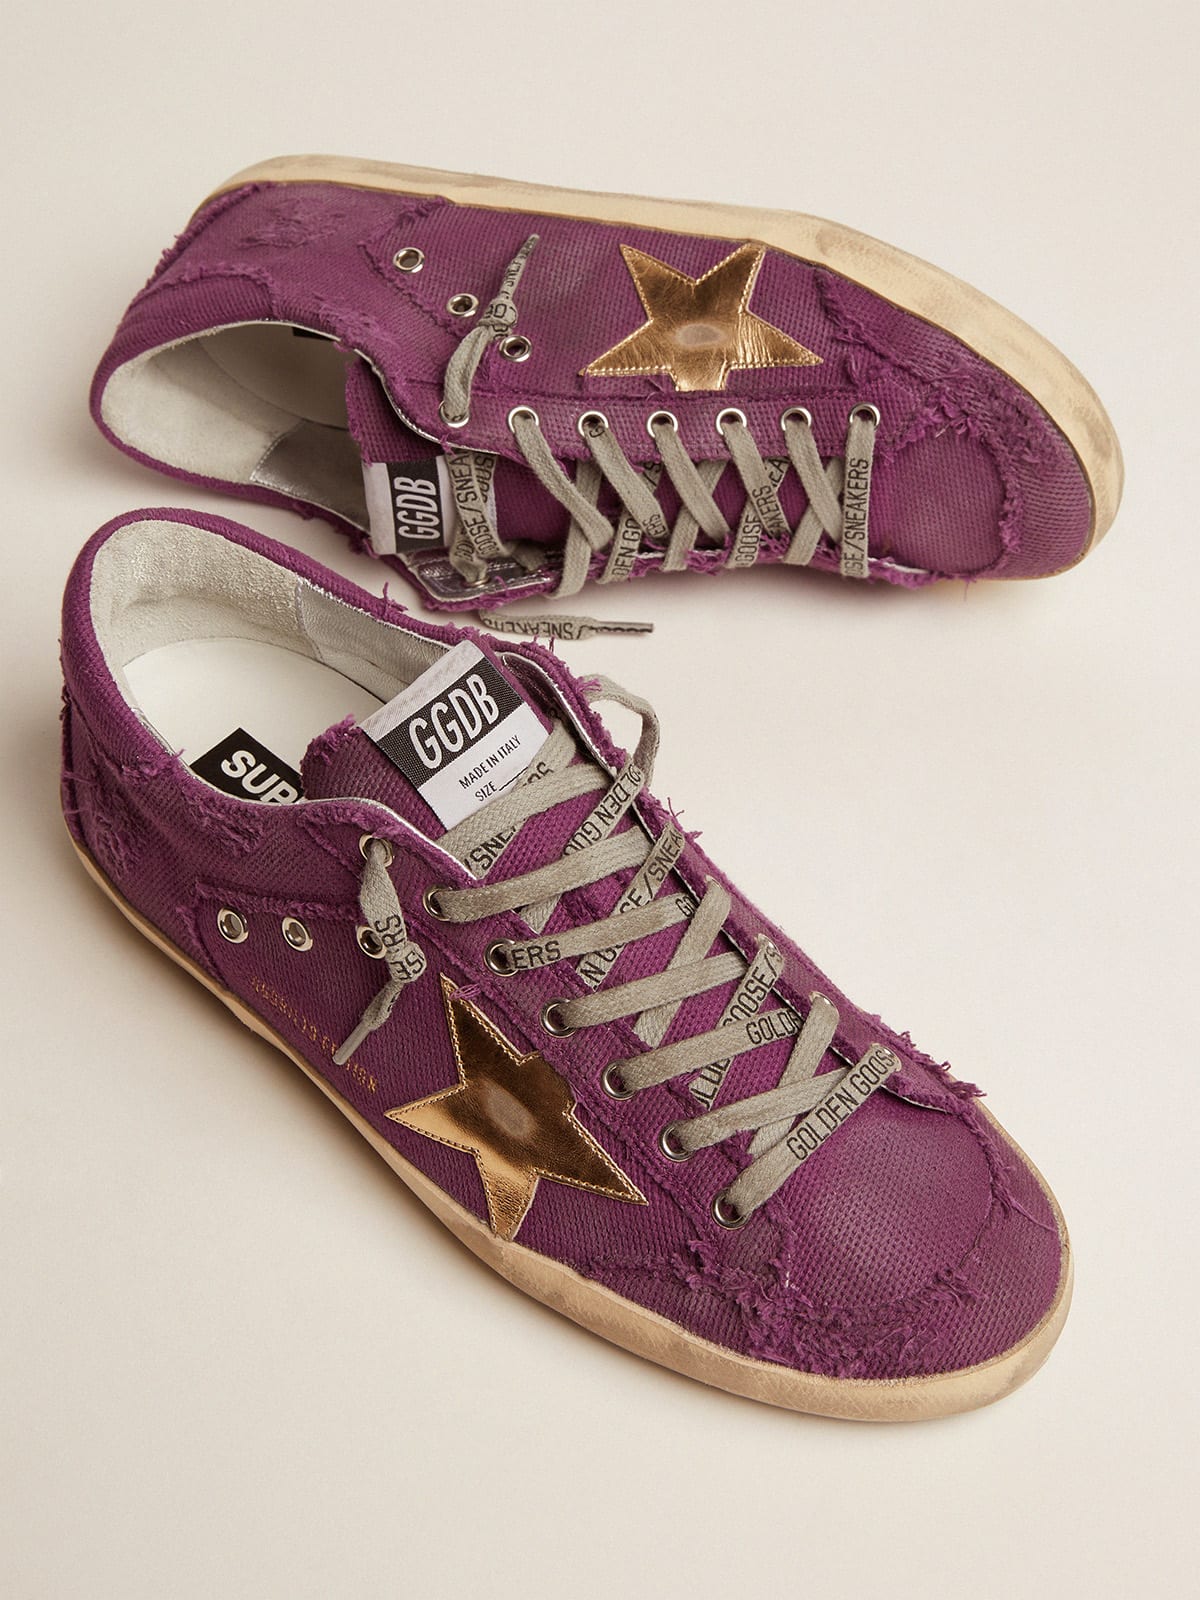 Golden Goose - Women's Super-Star LAB sneakers in purple distressed canvas with gold star   in 